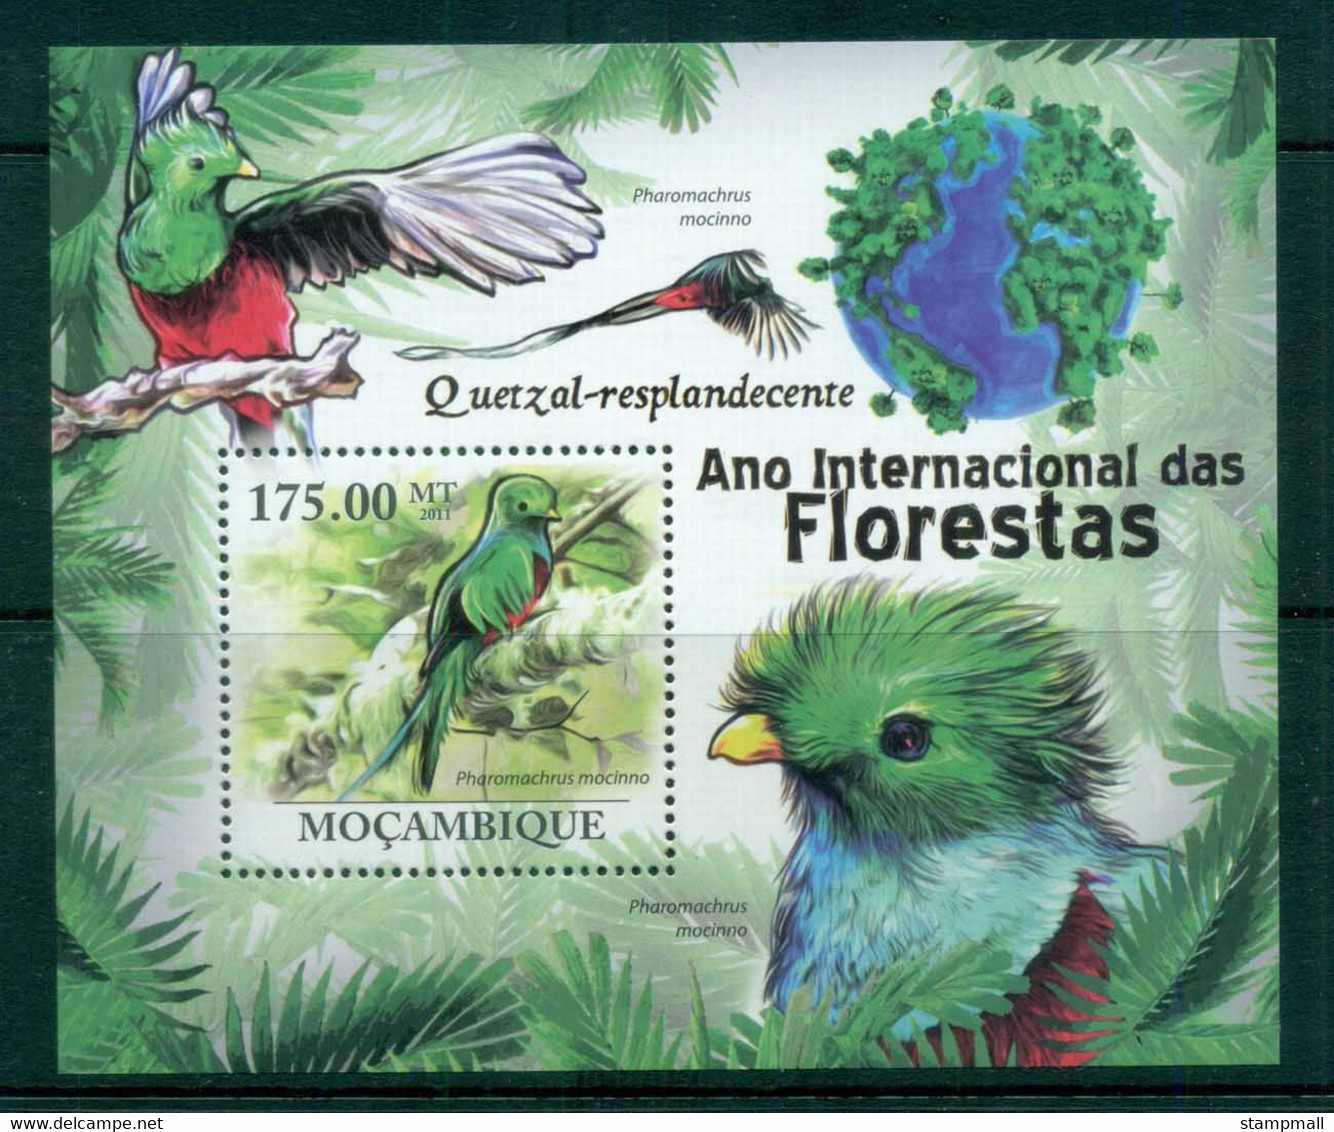 Mozambique 2011 Intl. Year Of Forests, Bird MS MUH - Mozambique